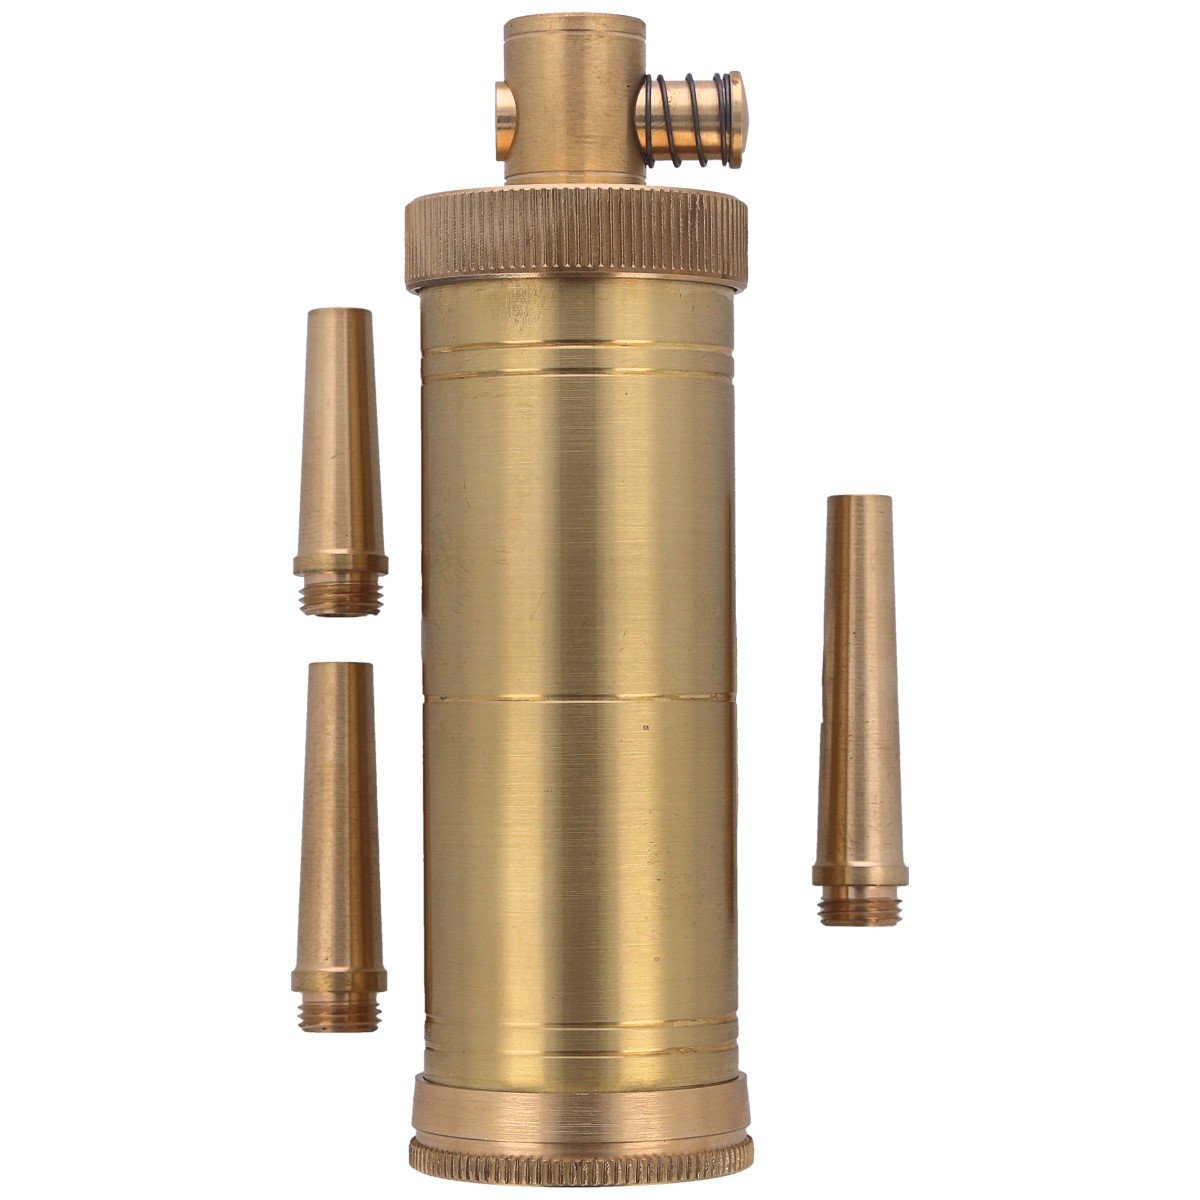 Charger Spouts, interchangeable, brass, for Powder Flasks & Horn